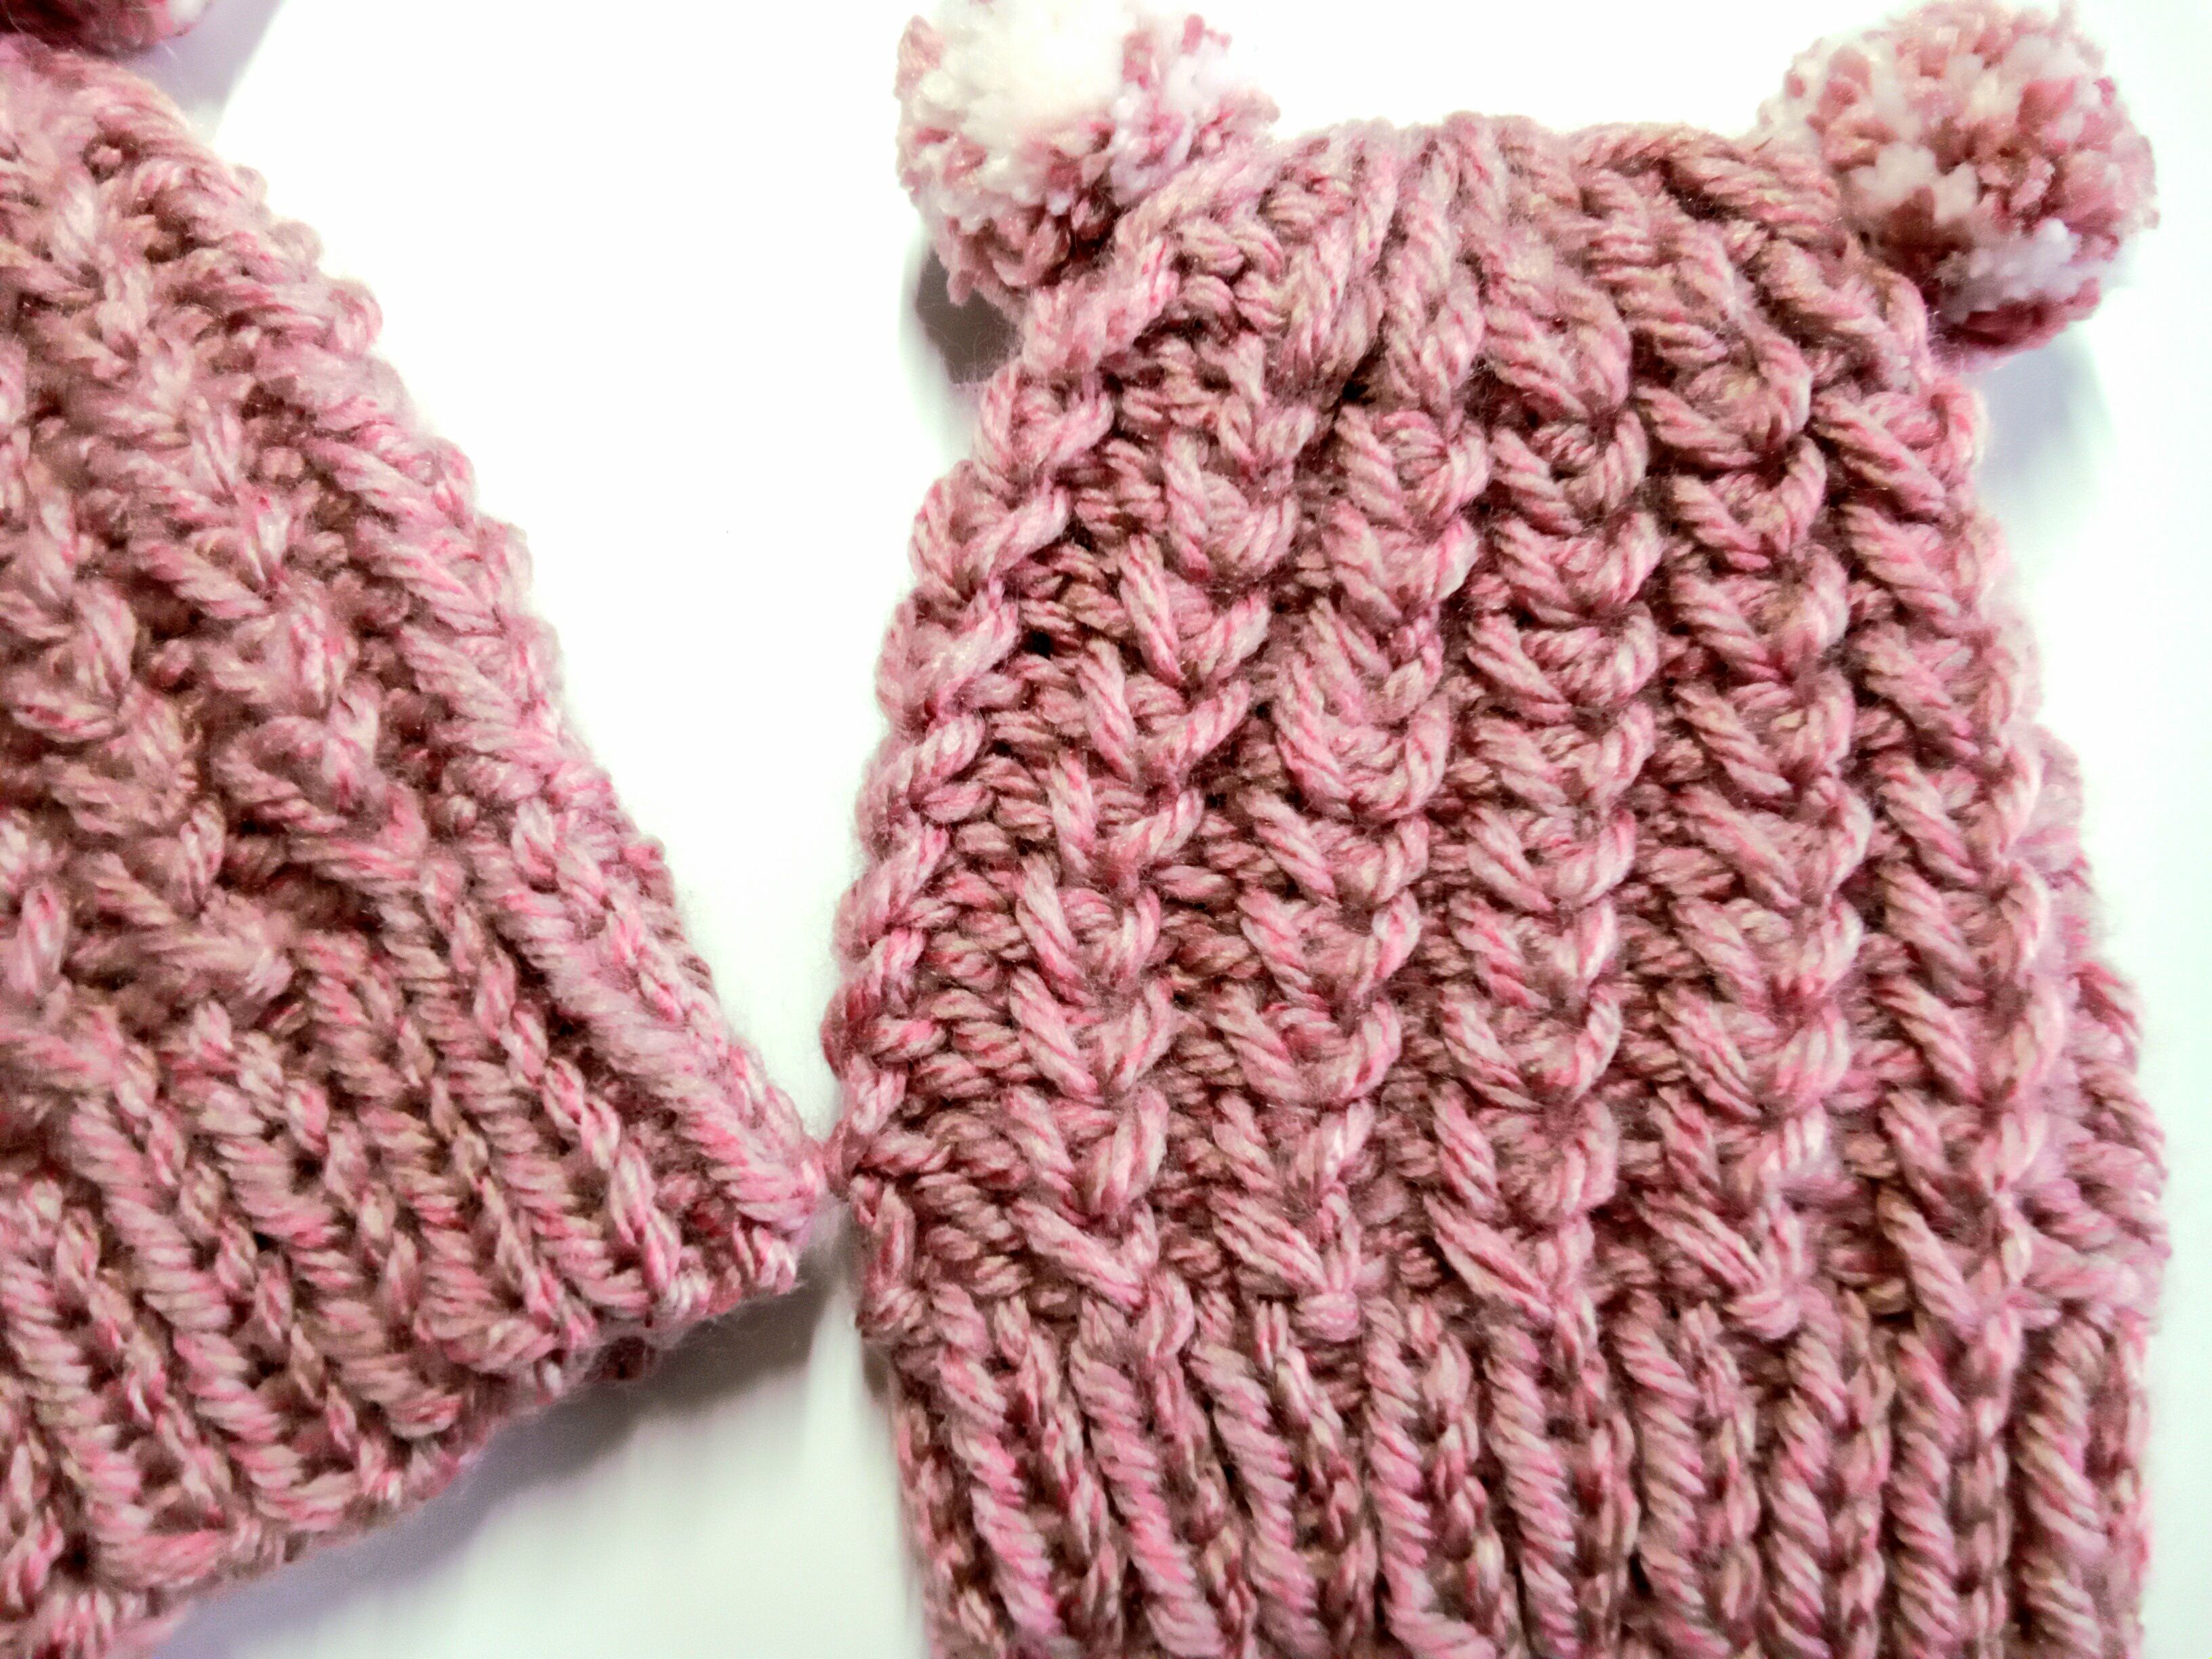 Mamma and Me Hand Knit Beanies / hats in Vegan Friendly super chucky acrylic yarn, with removable pompoms. Adult and1-3 years sizes.